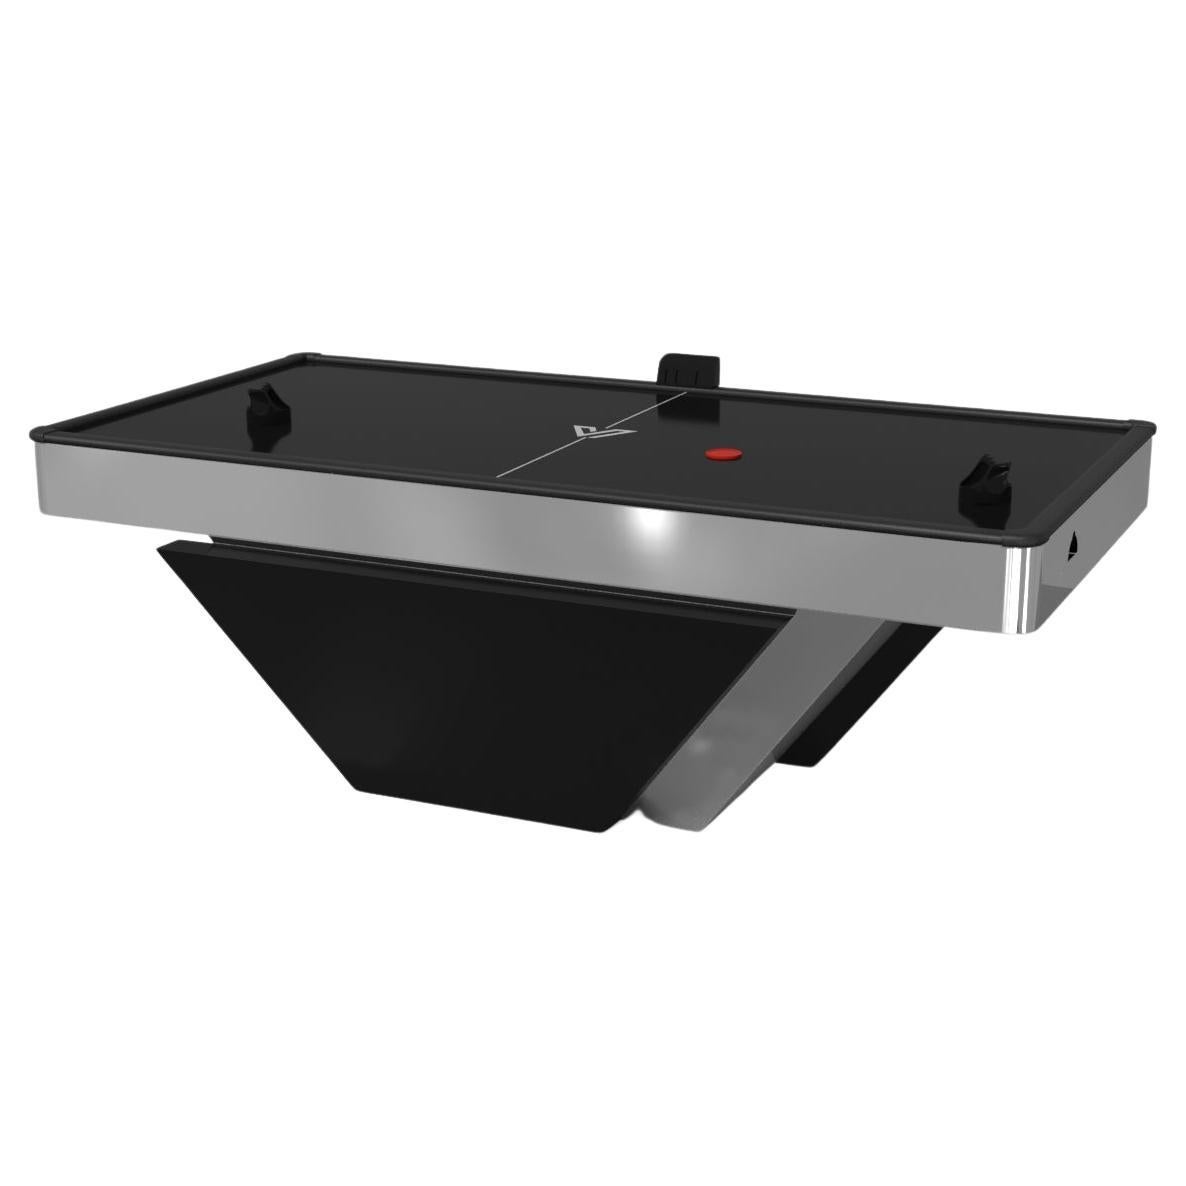 Elevate Customs Vogue Air Hockey Tables /Stainless Steel Metal in 7'-Made in USA